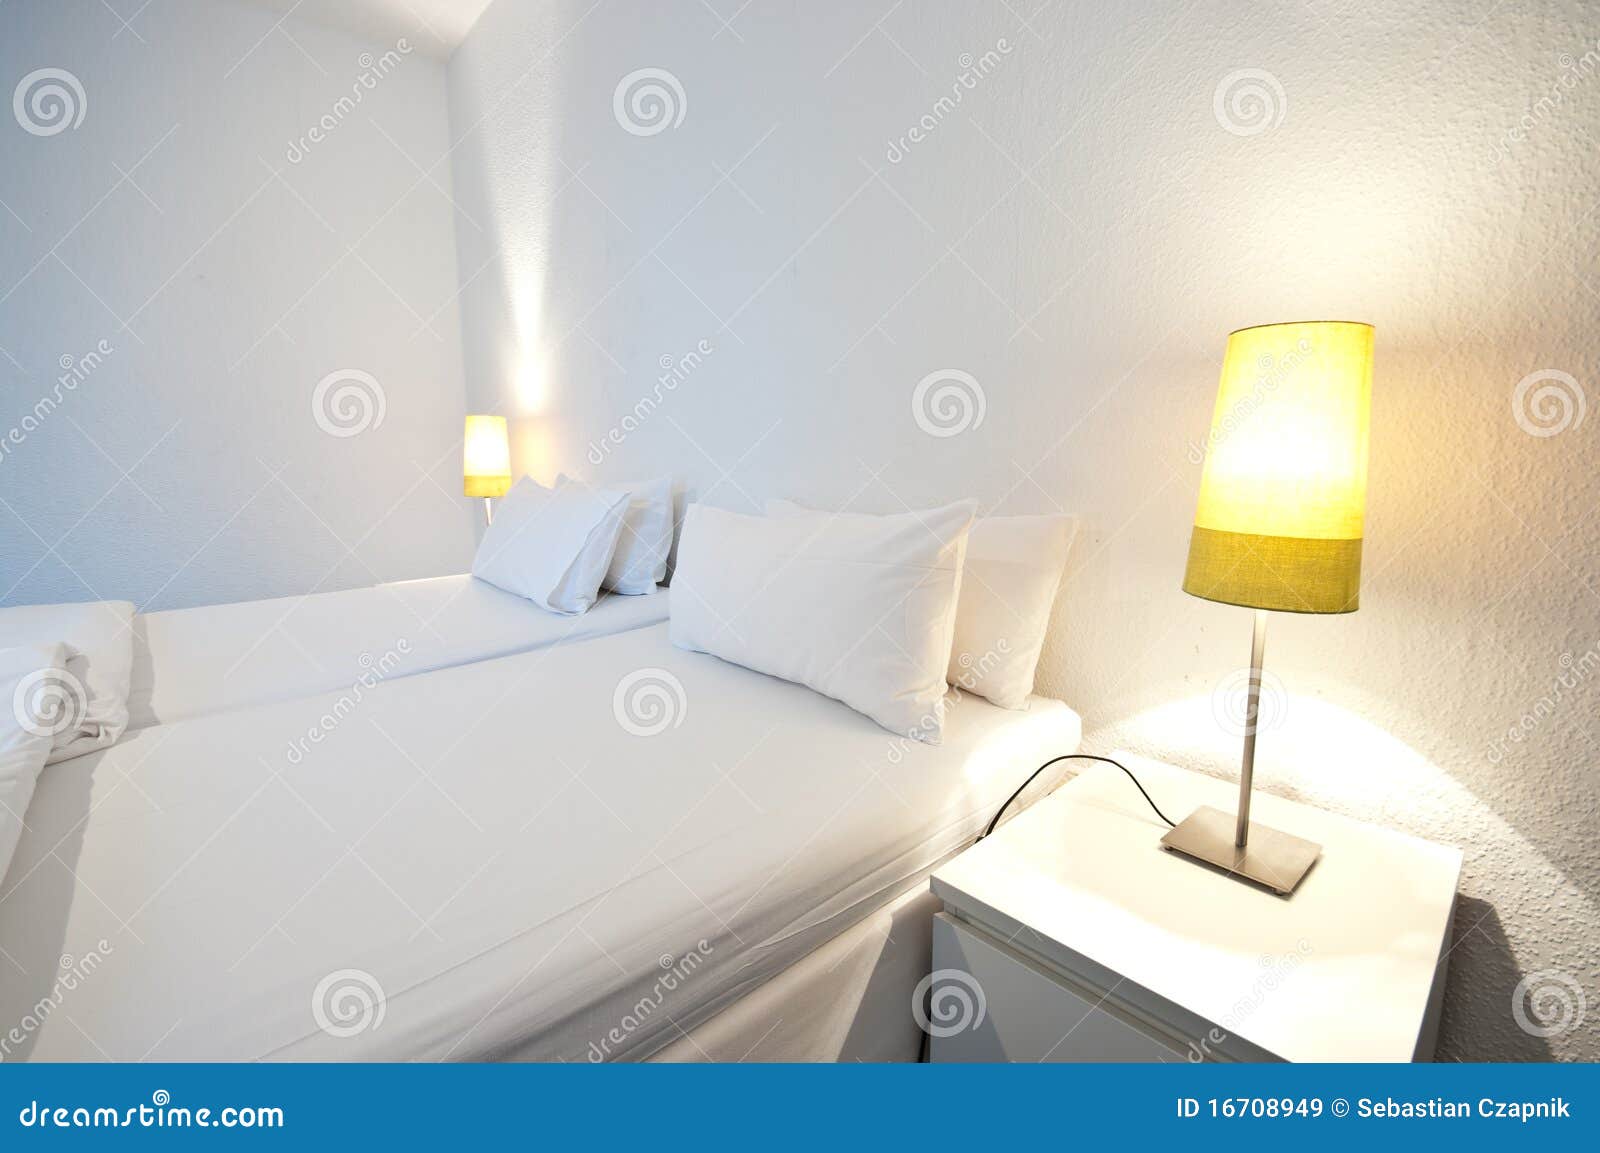 white room with lamps